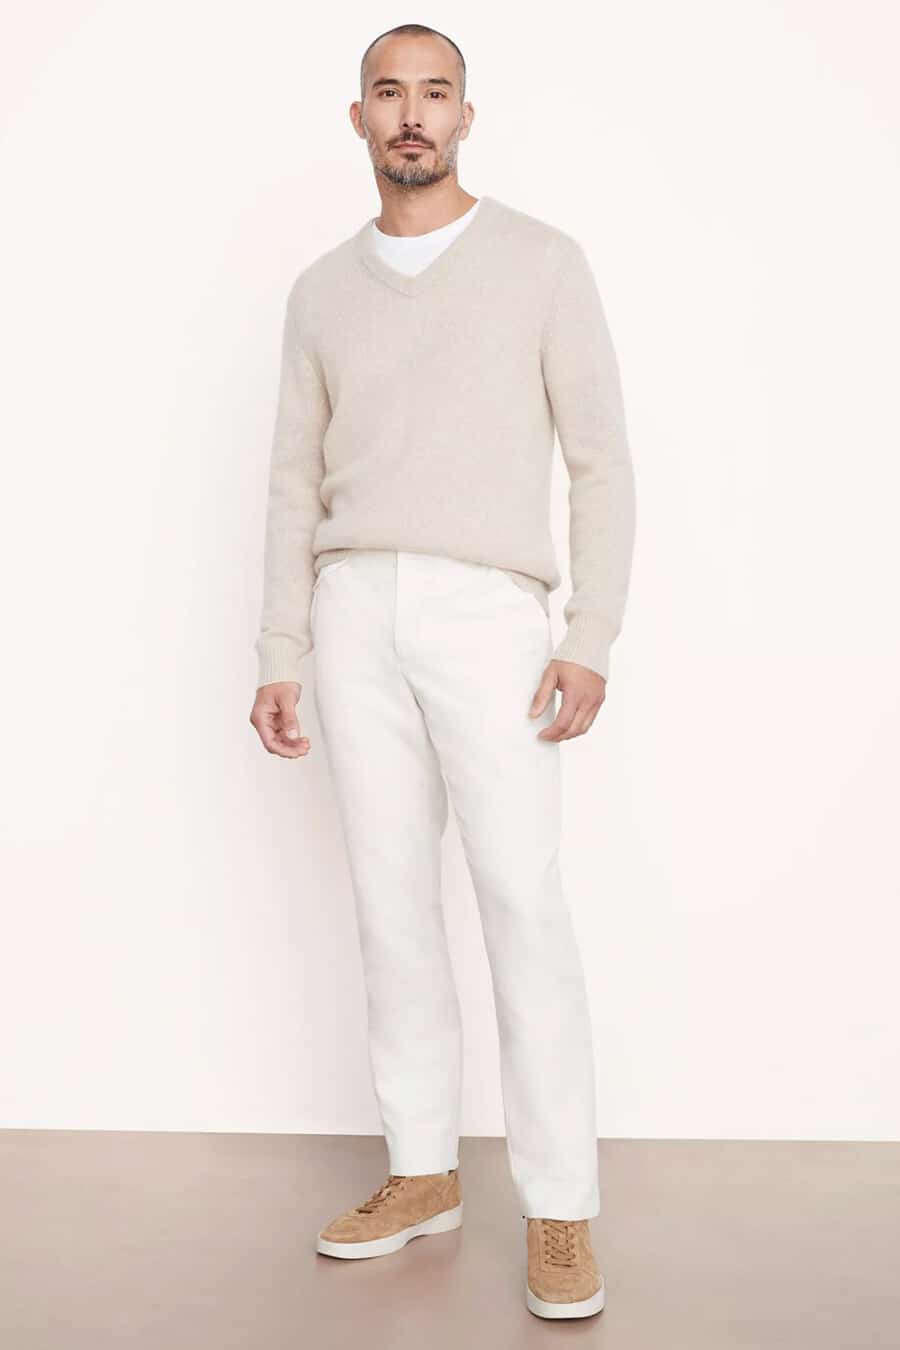 Men's white pants, white T-shirt, beige V-neck sweater and tan suede sneakers outfit